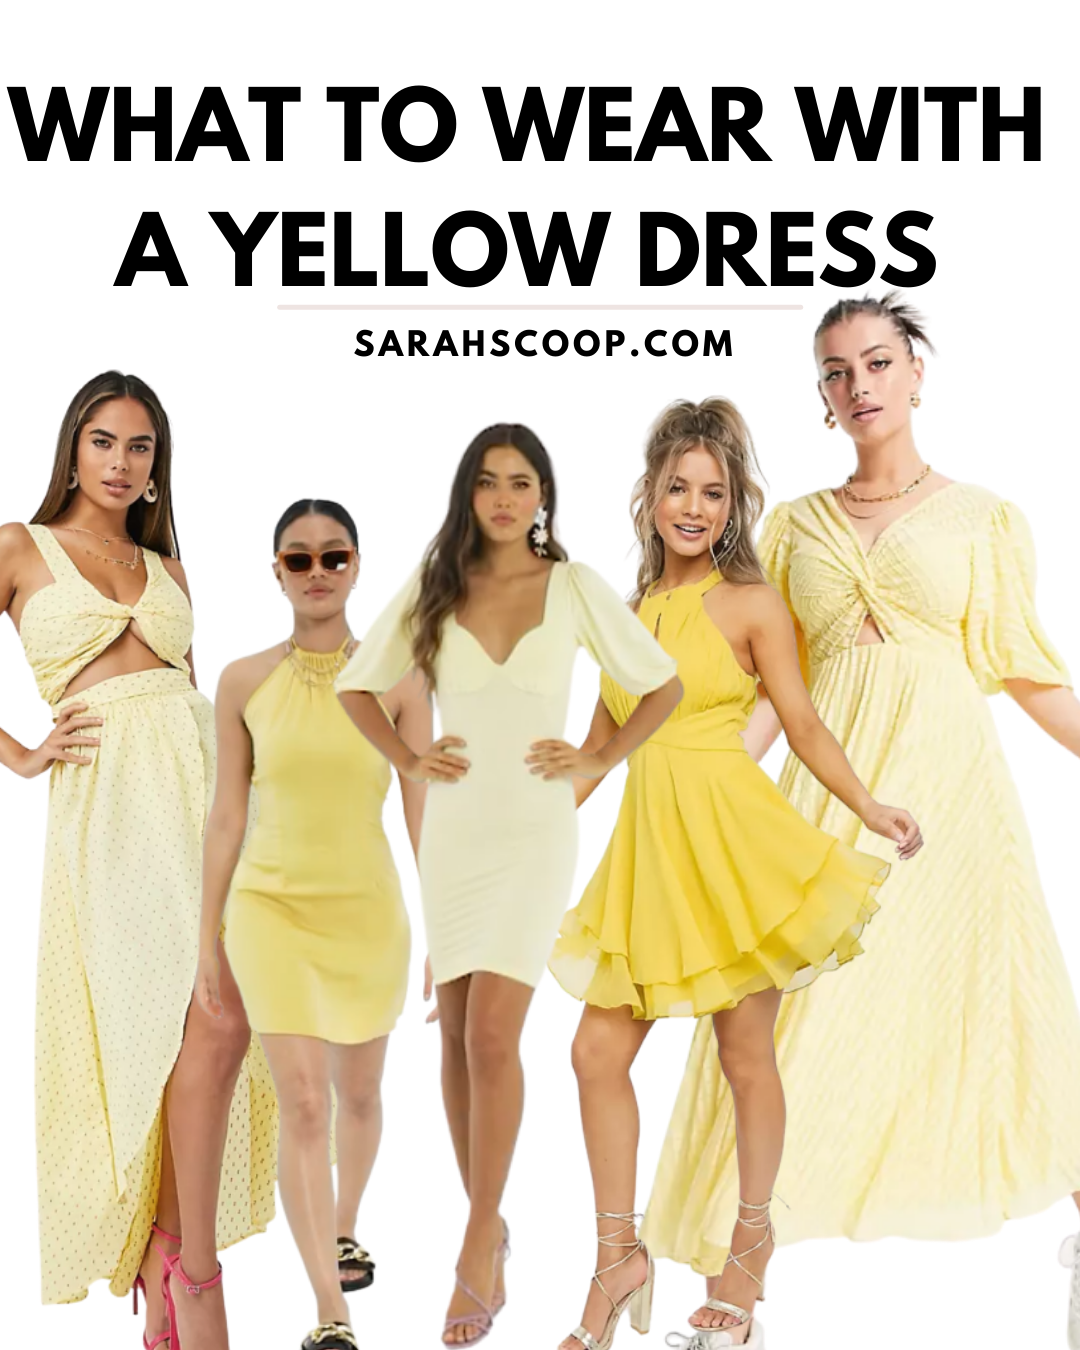 What to Wear With a Yellow Dress for Summer - Sarah Scoop